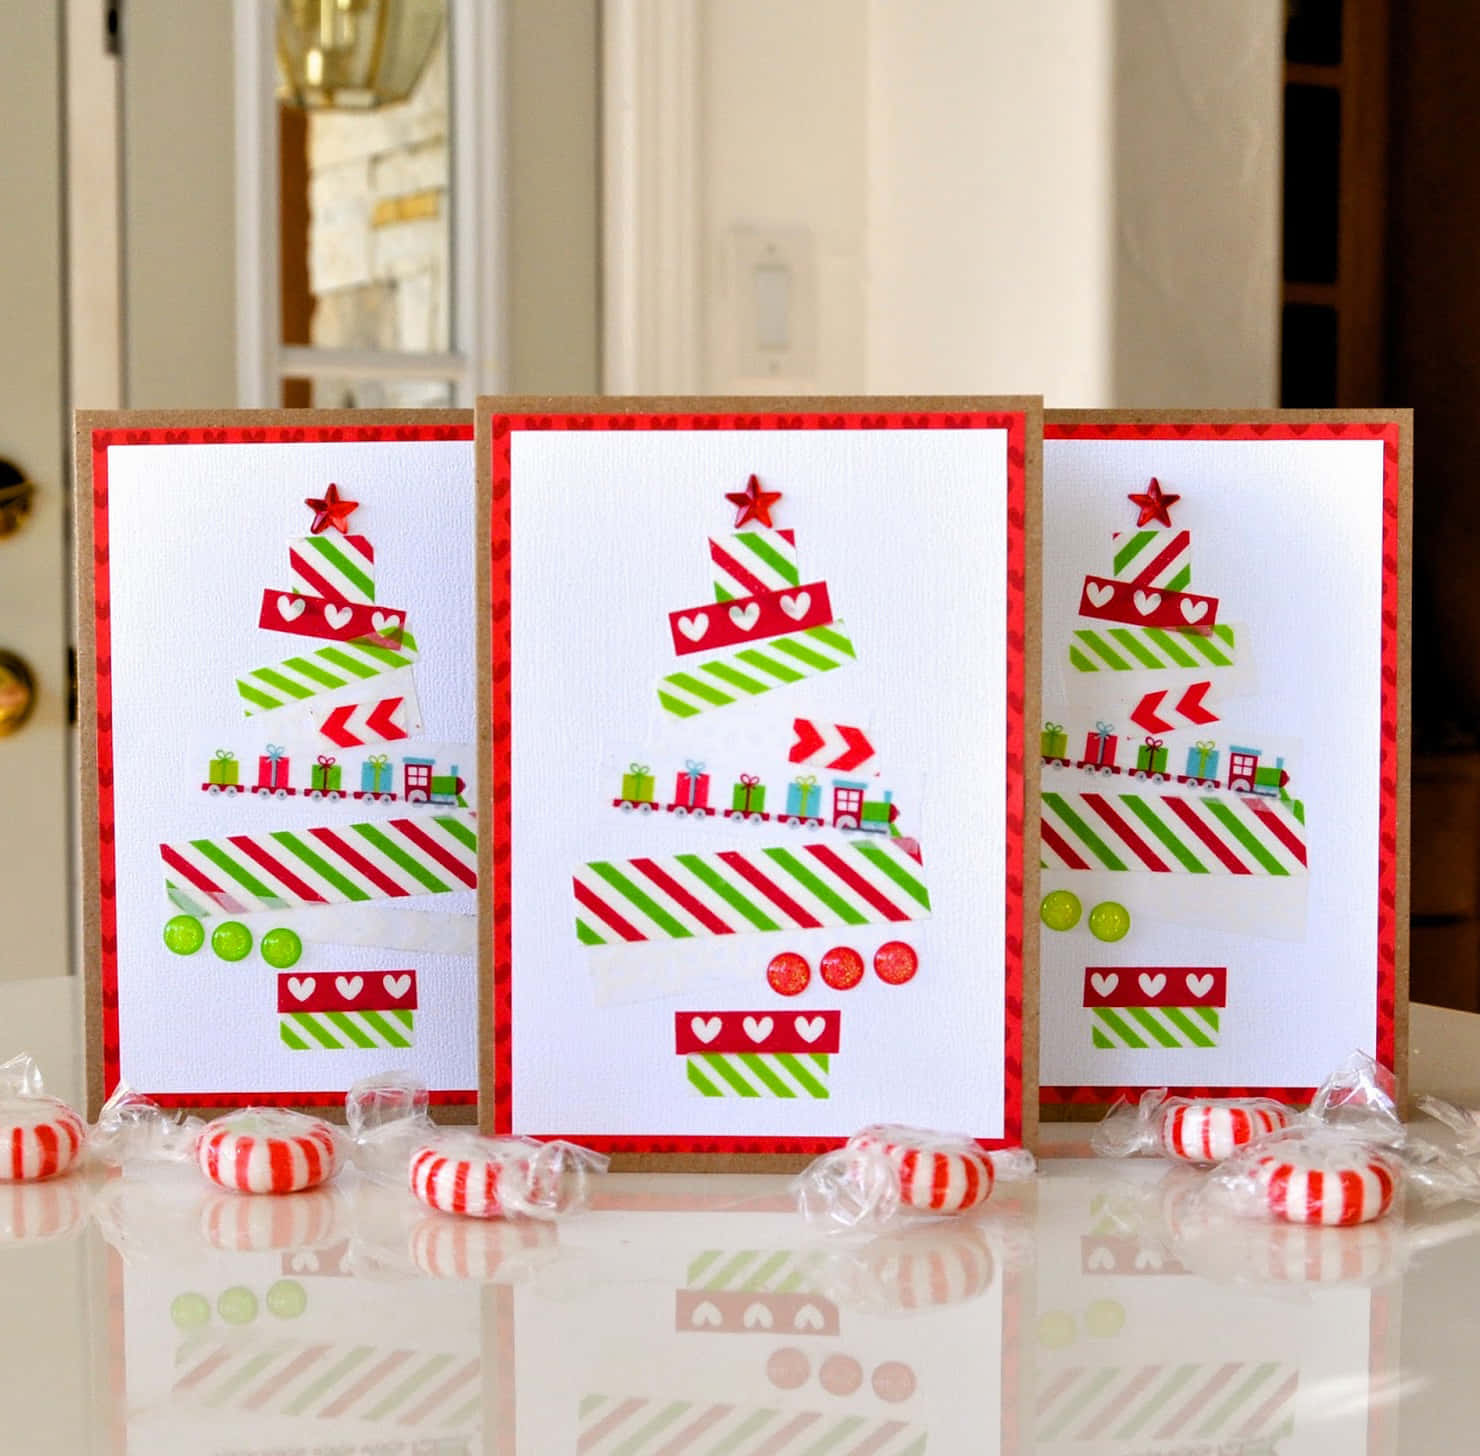 Bring joy and happiness this season with a beautiful Christmas card.